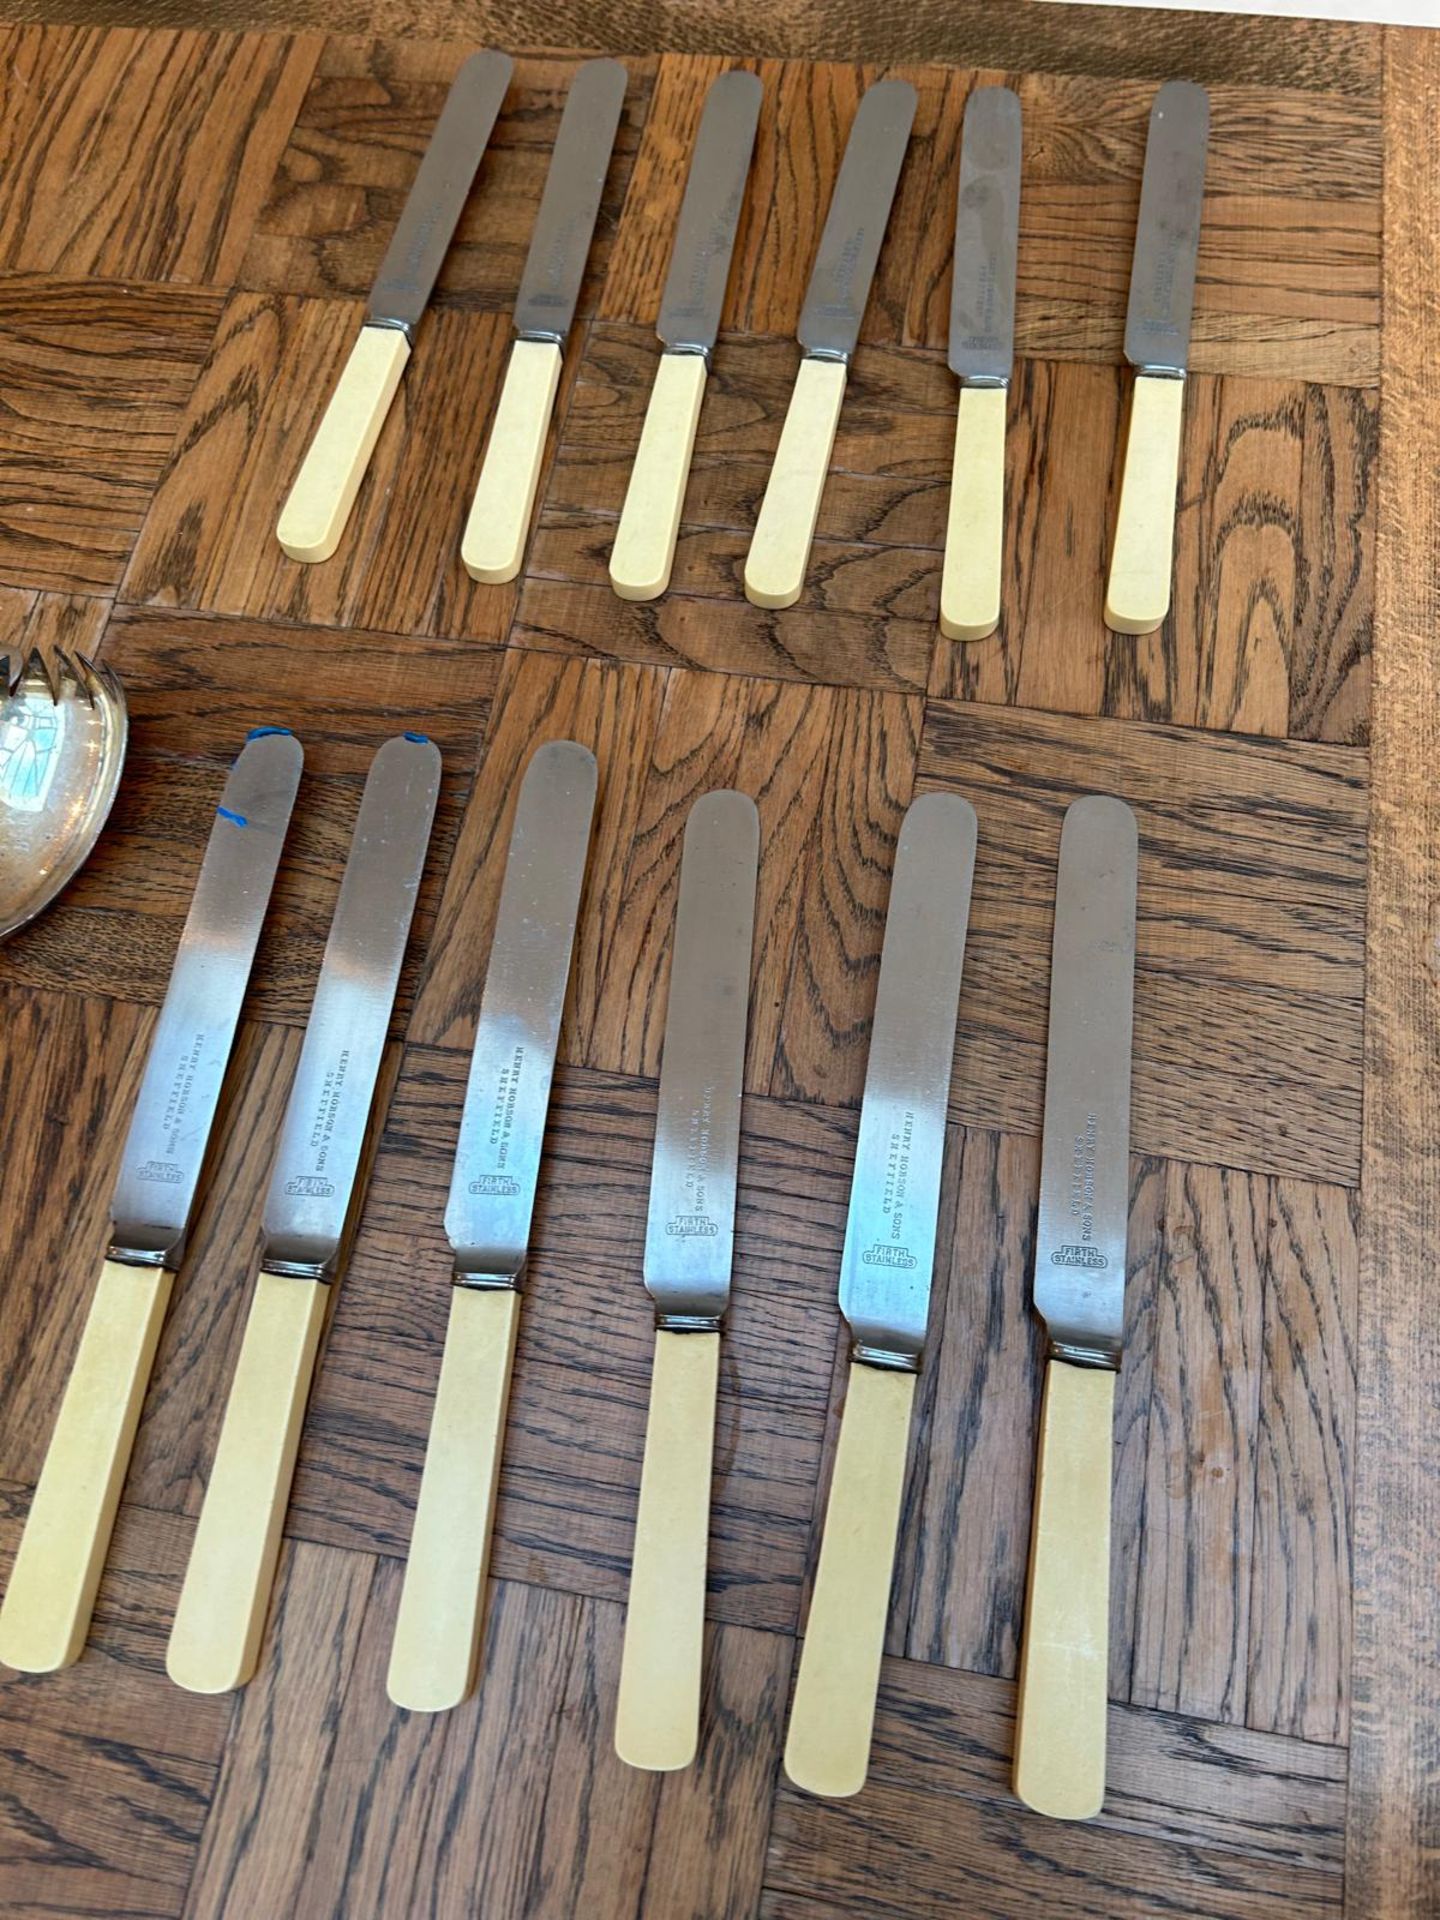 A set of 12 x Vintage Henry Hobson & Sons Express Table Knives - Firth Stainless Flatware, 1930s. - Image 5 of 5